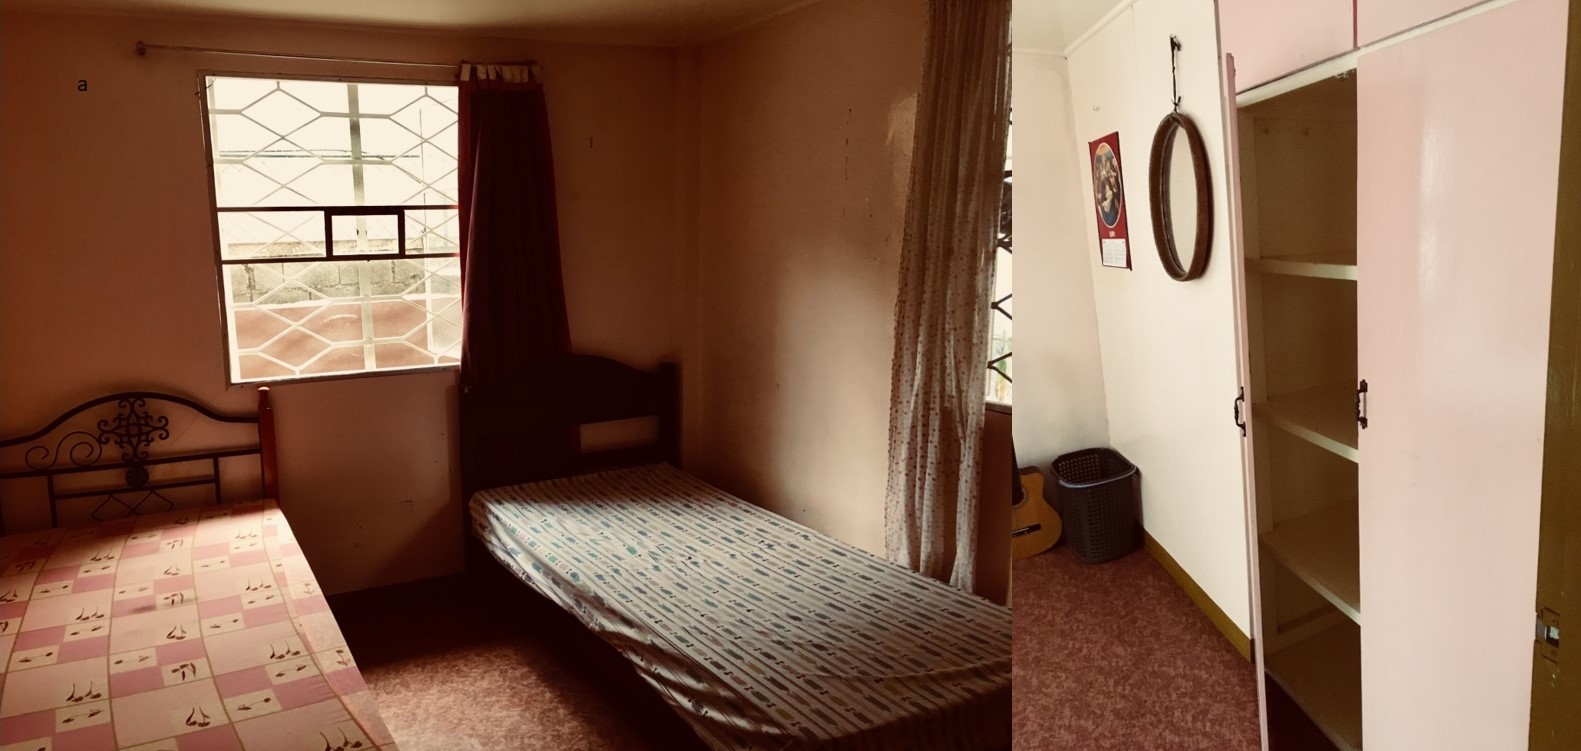 Baguio Room for Rent